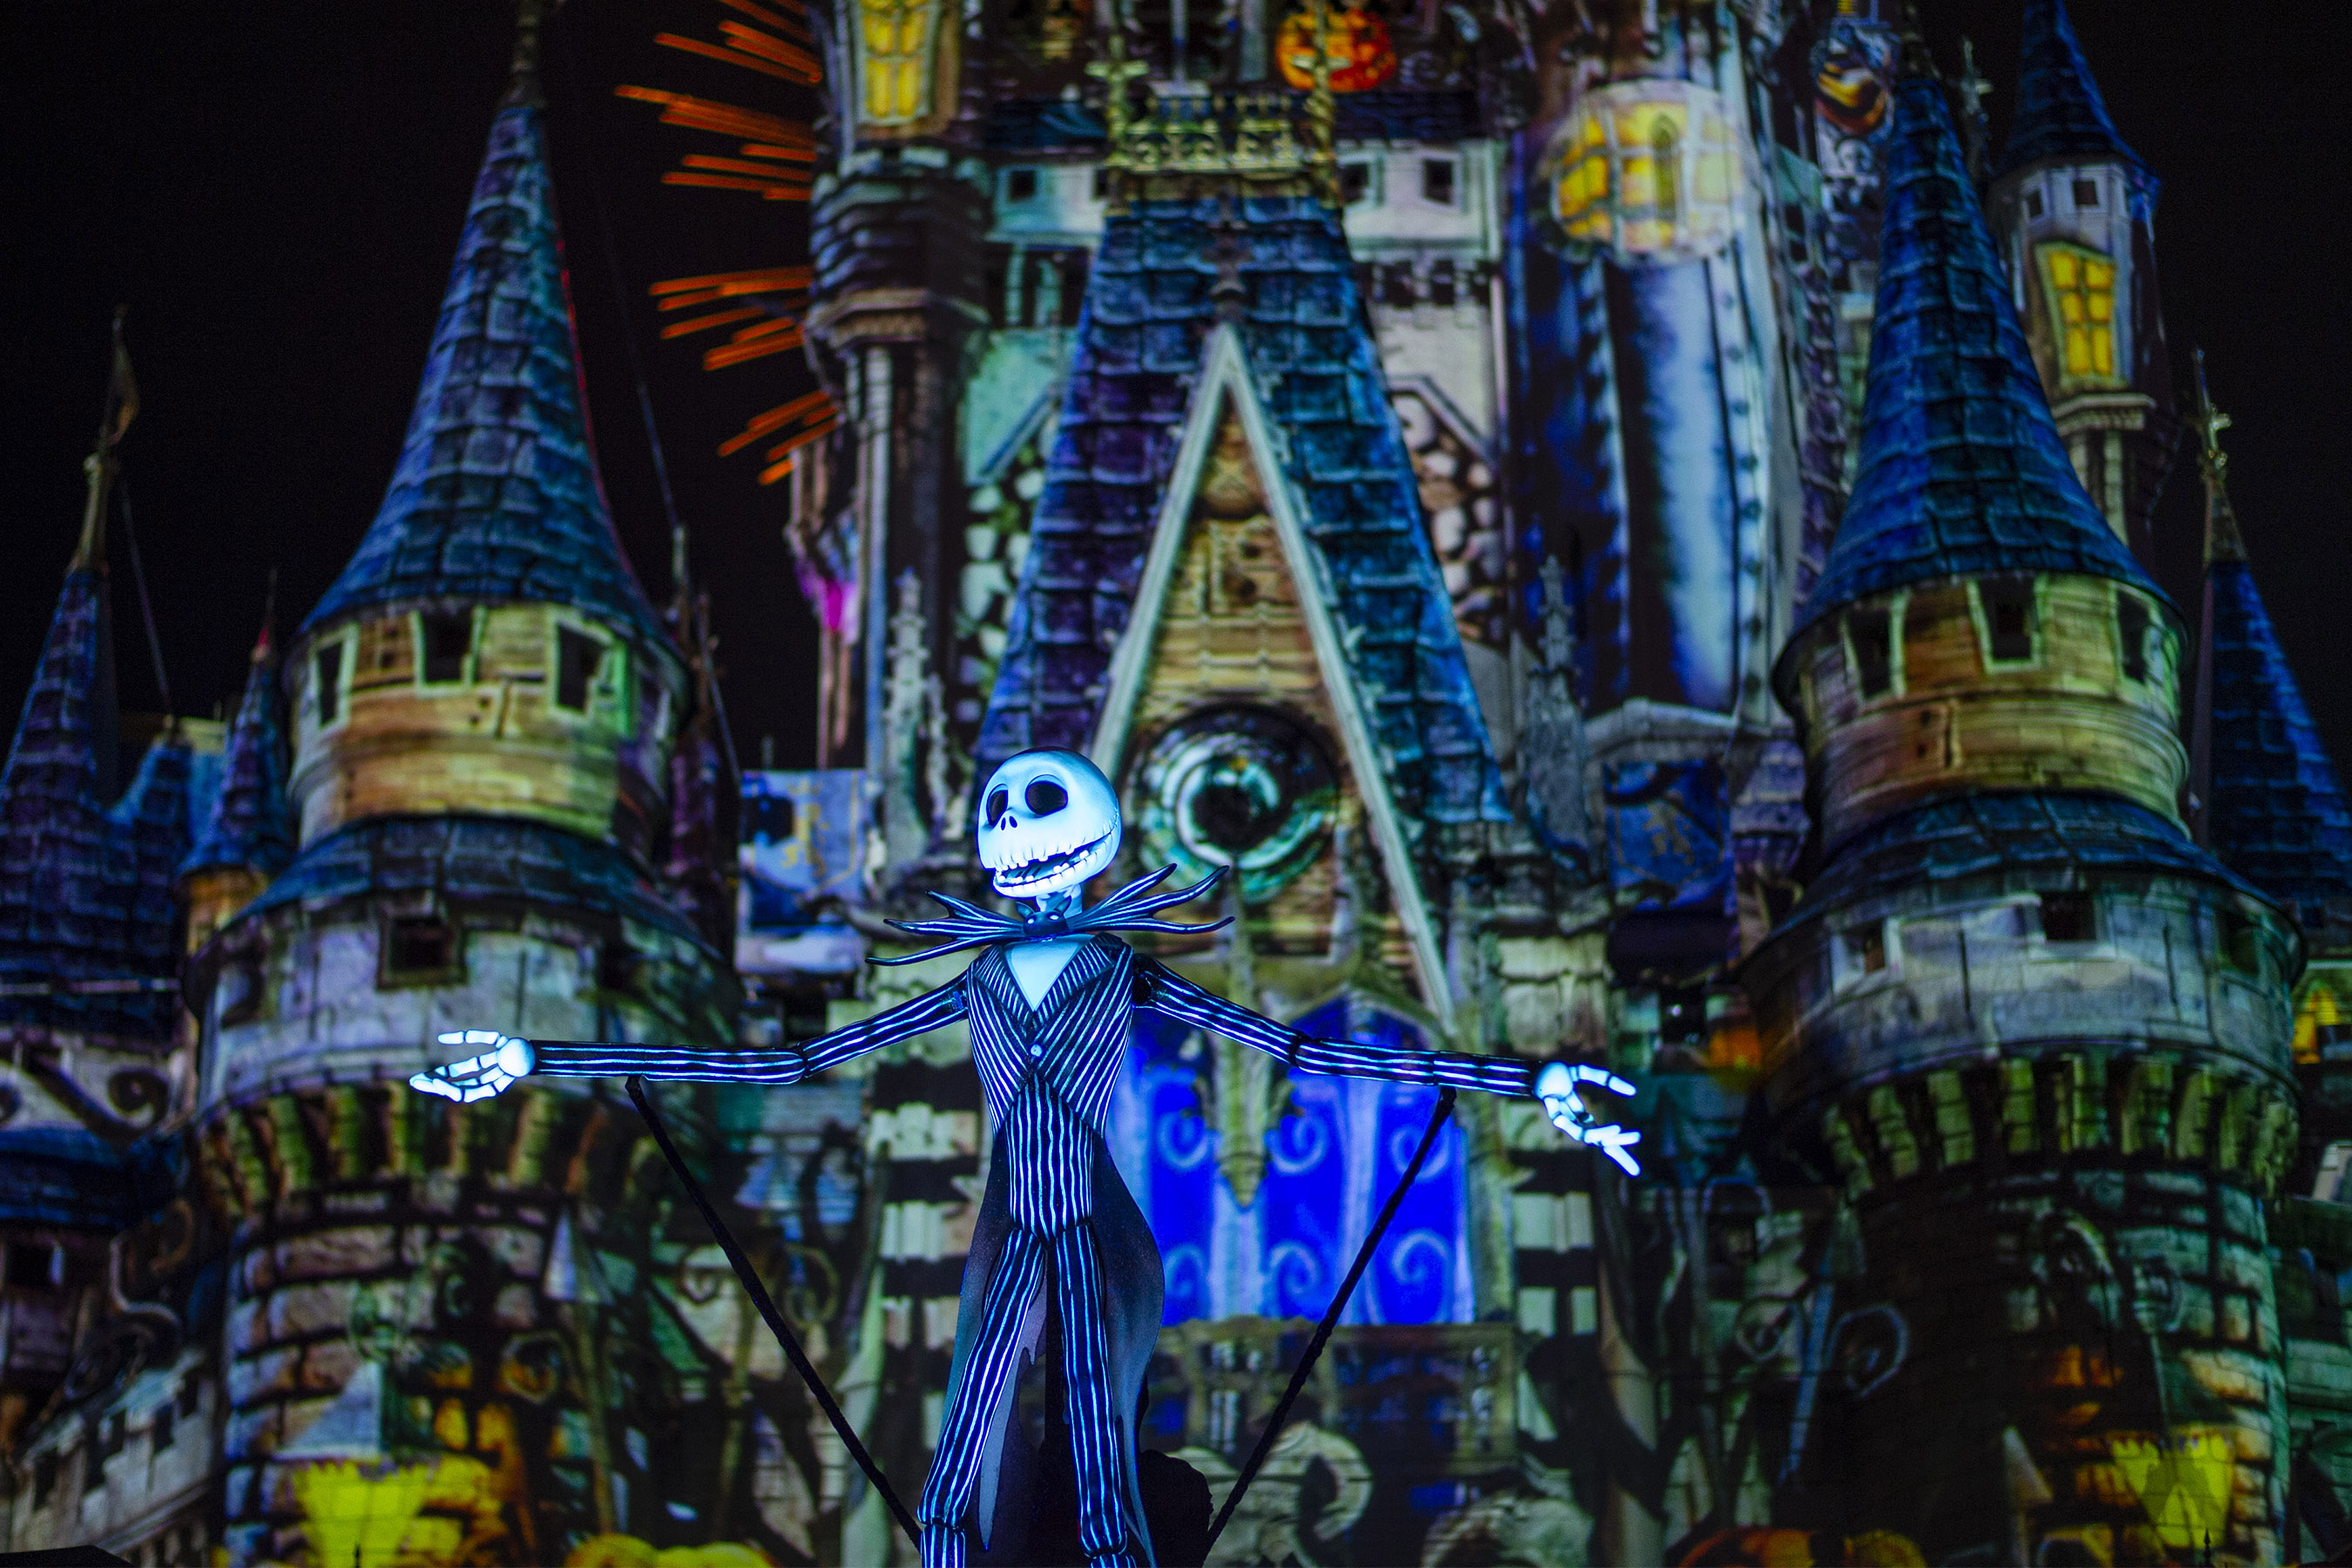 VIDEO First look at Disney's Not So Spooky Spectacular coming to this